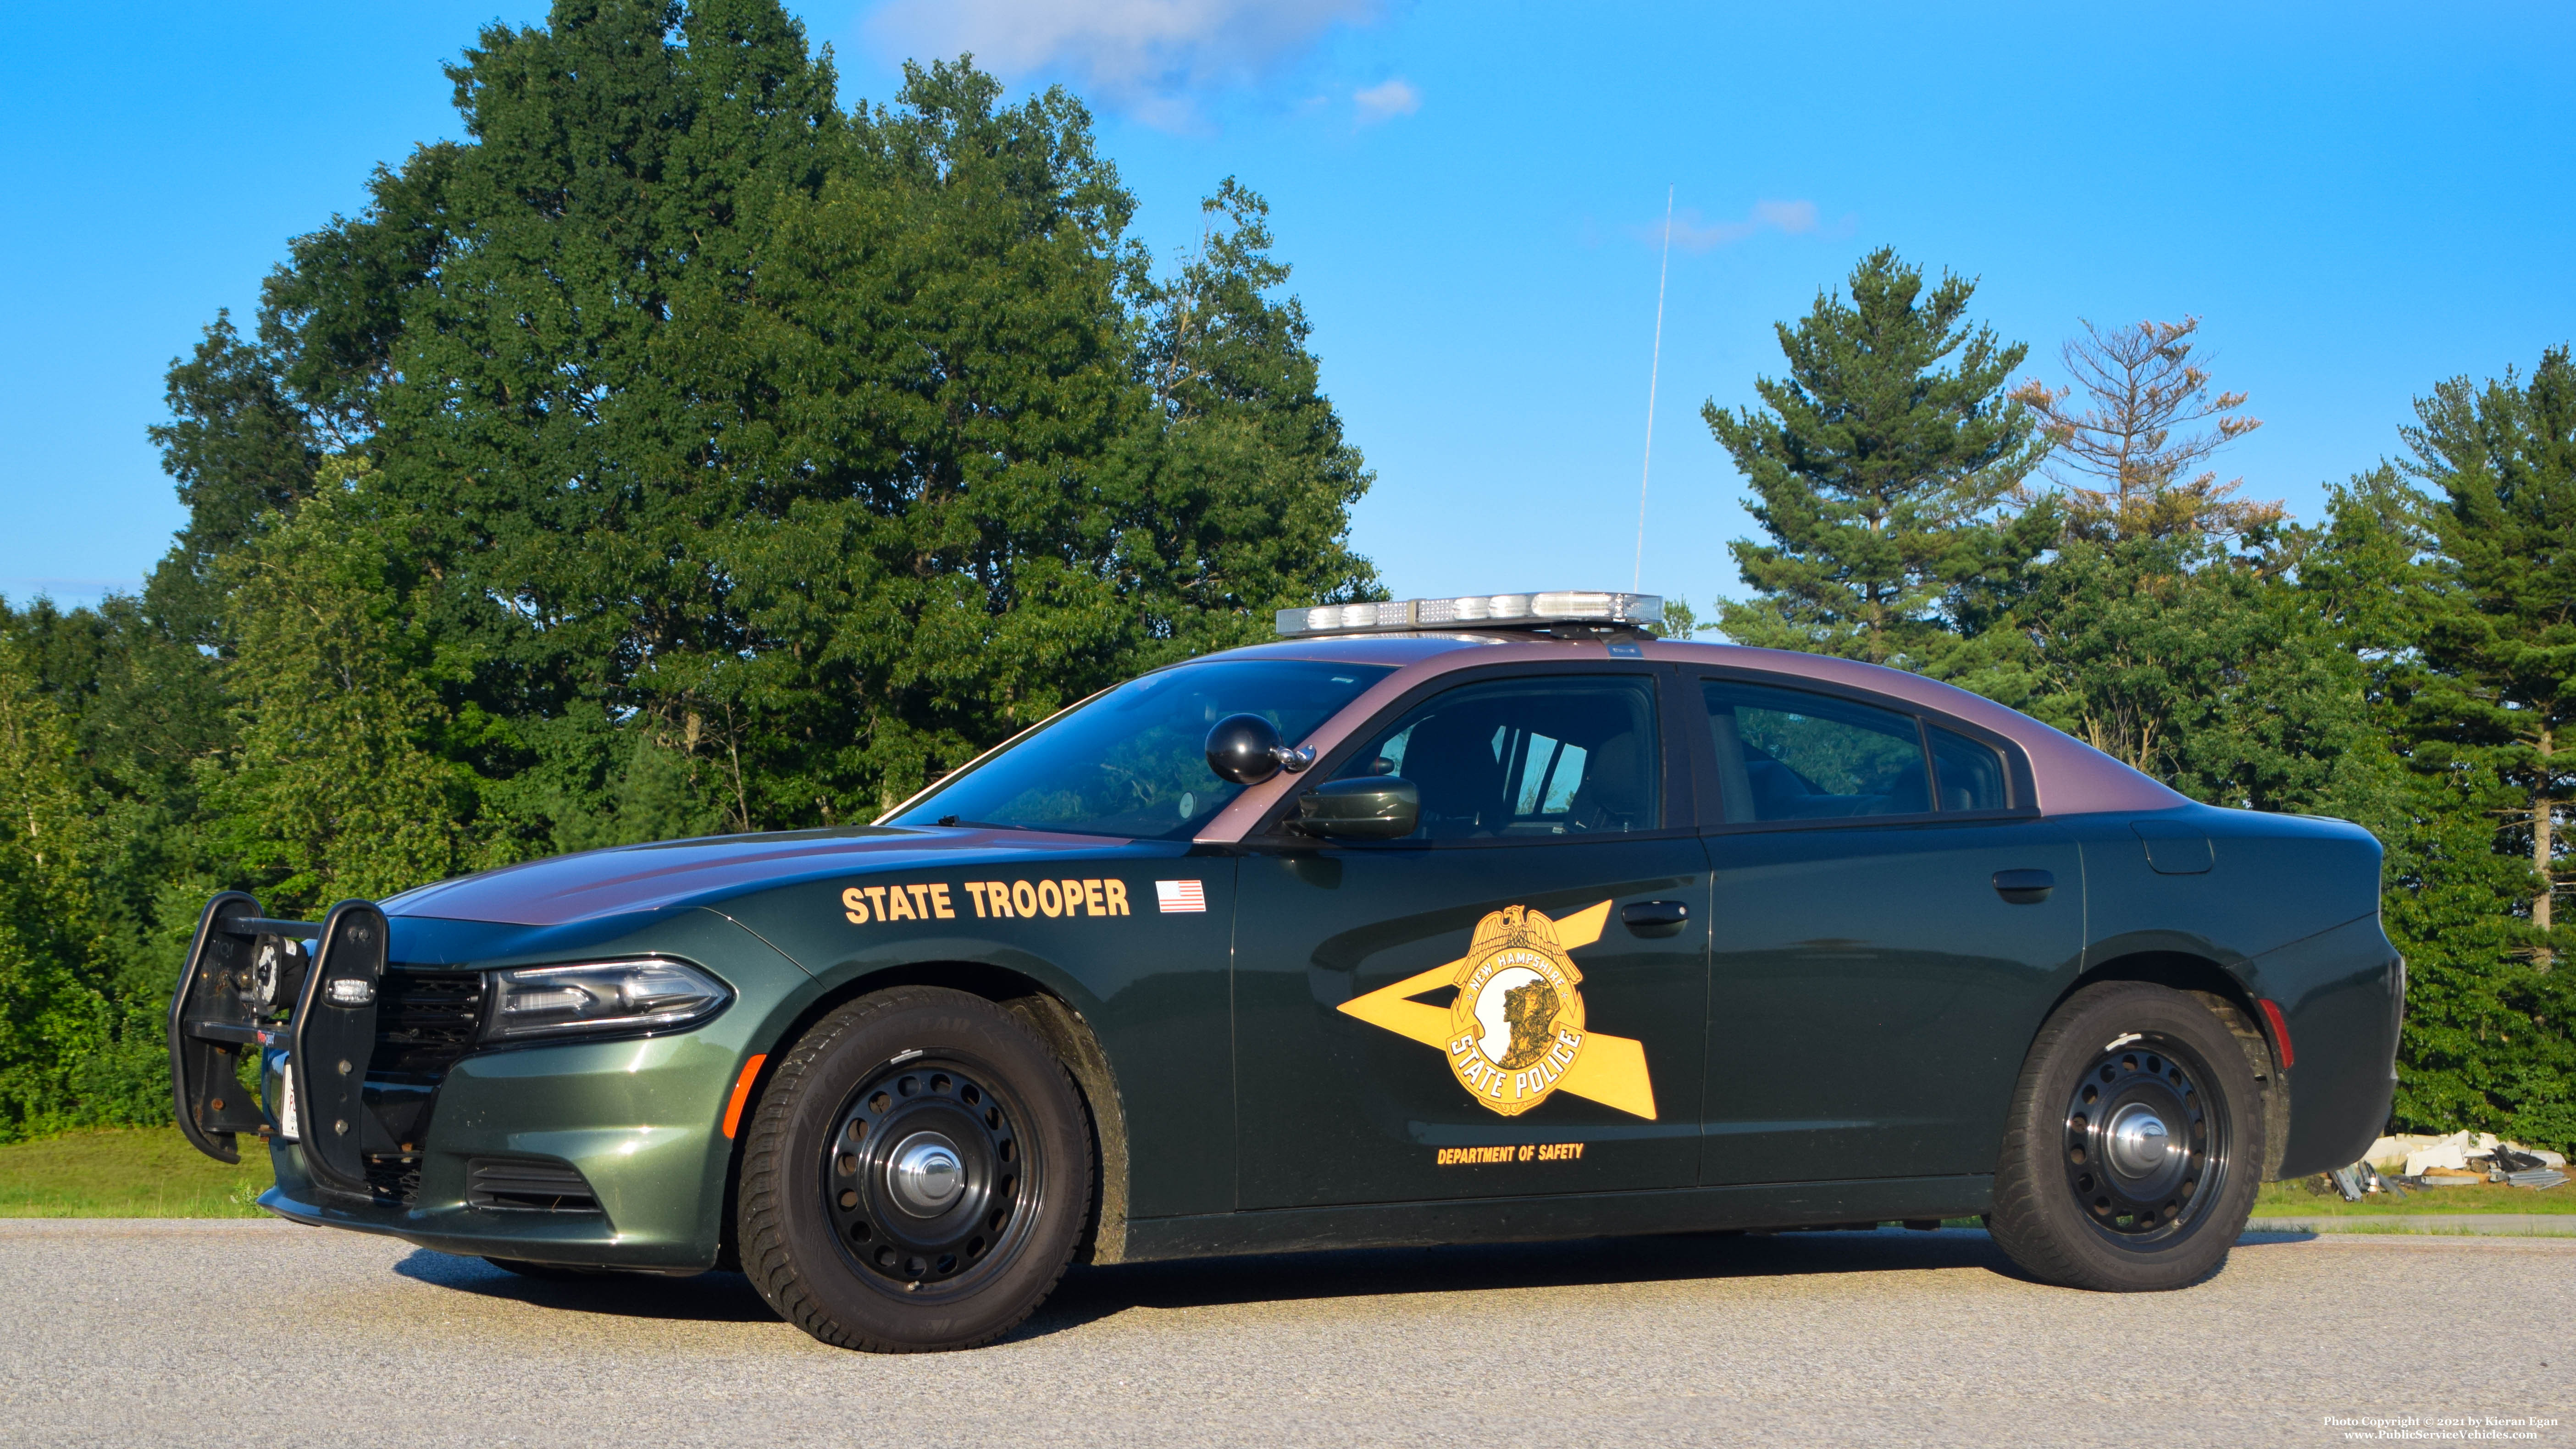 A photo  of New Hampshire State Police
            Cruiser 218, a 2015-2016 Dodge Charger             taken by Kieran Egan